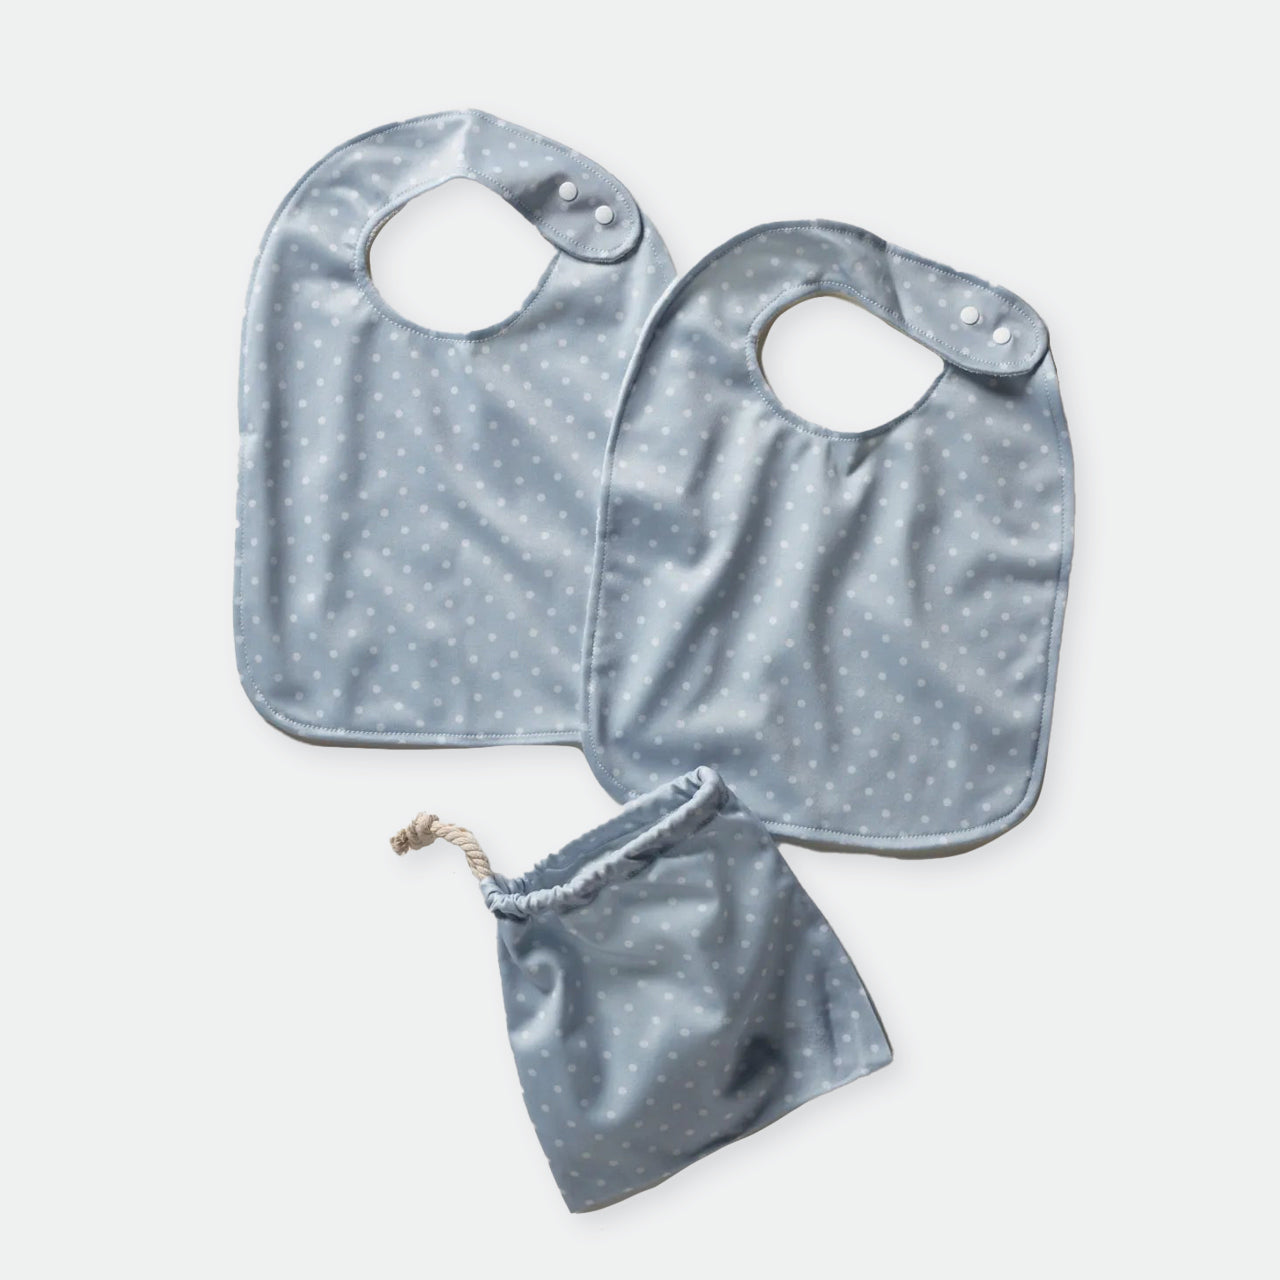 Baby Basics Grey Bibs and bag on a white background